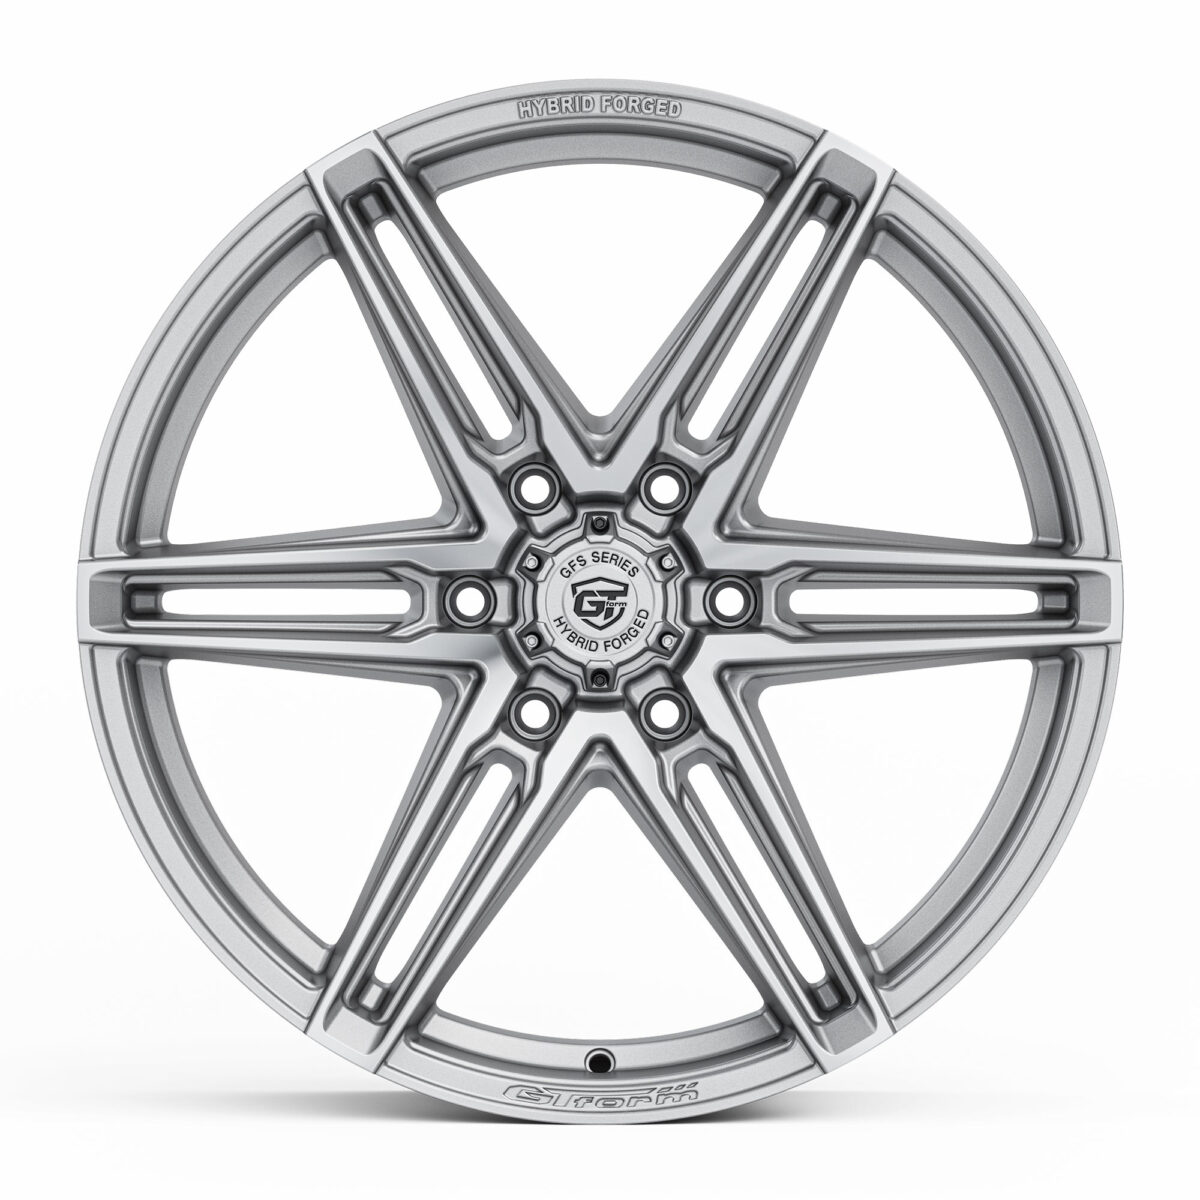 4X4 WHEELS GT FORM GFS2 HYBRID FORGED SILVER MACHINED FACE 20 INCH OFFROAD RIMS FOR 4WD SUV